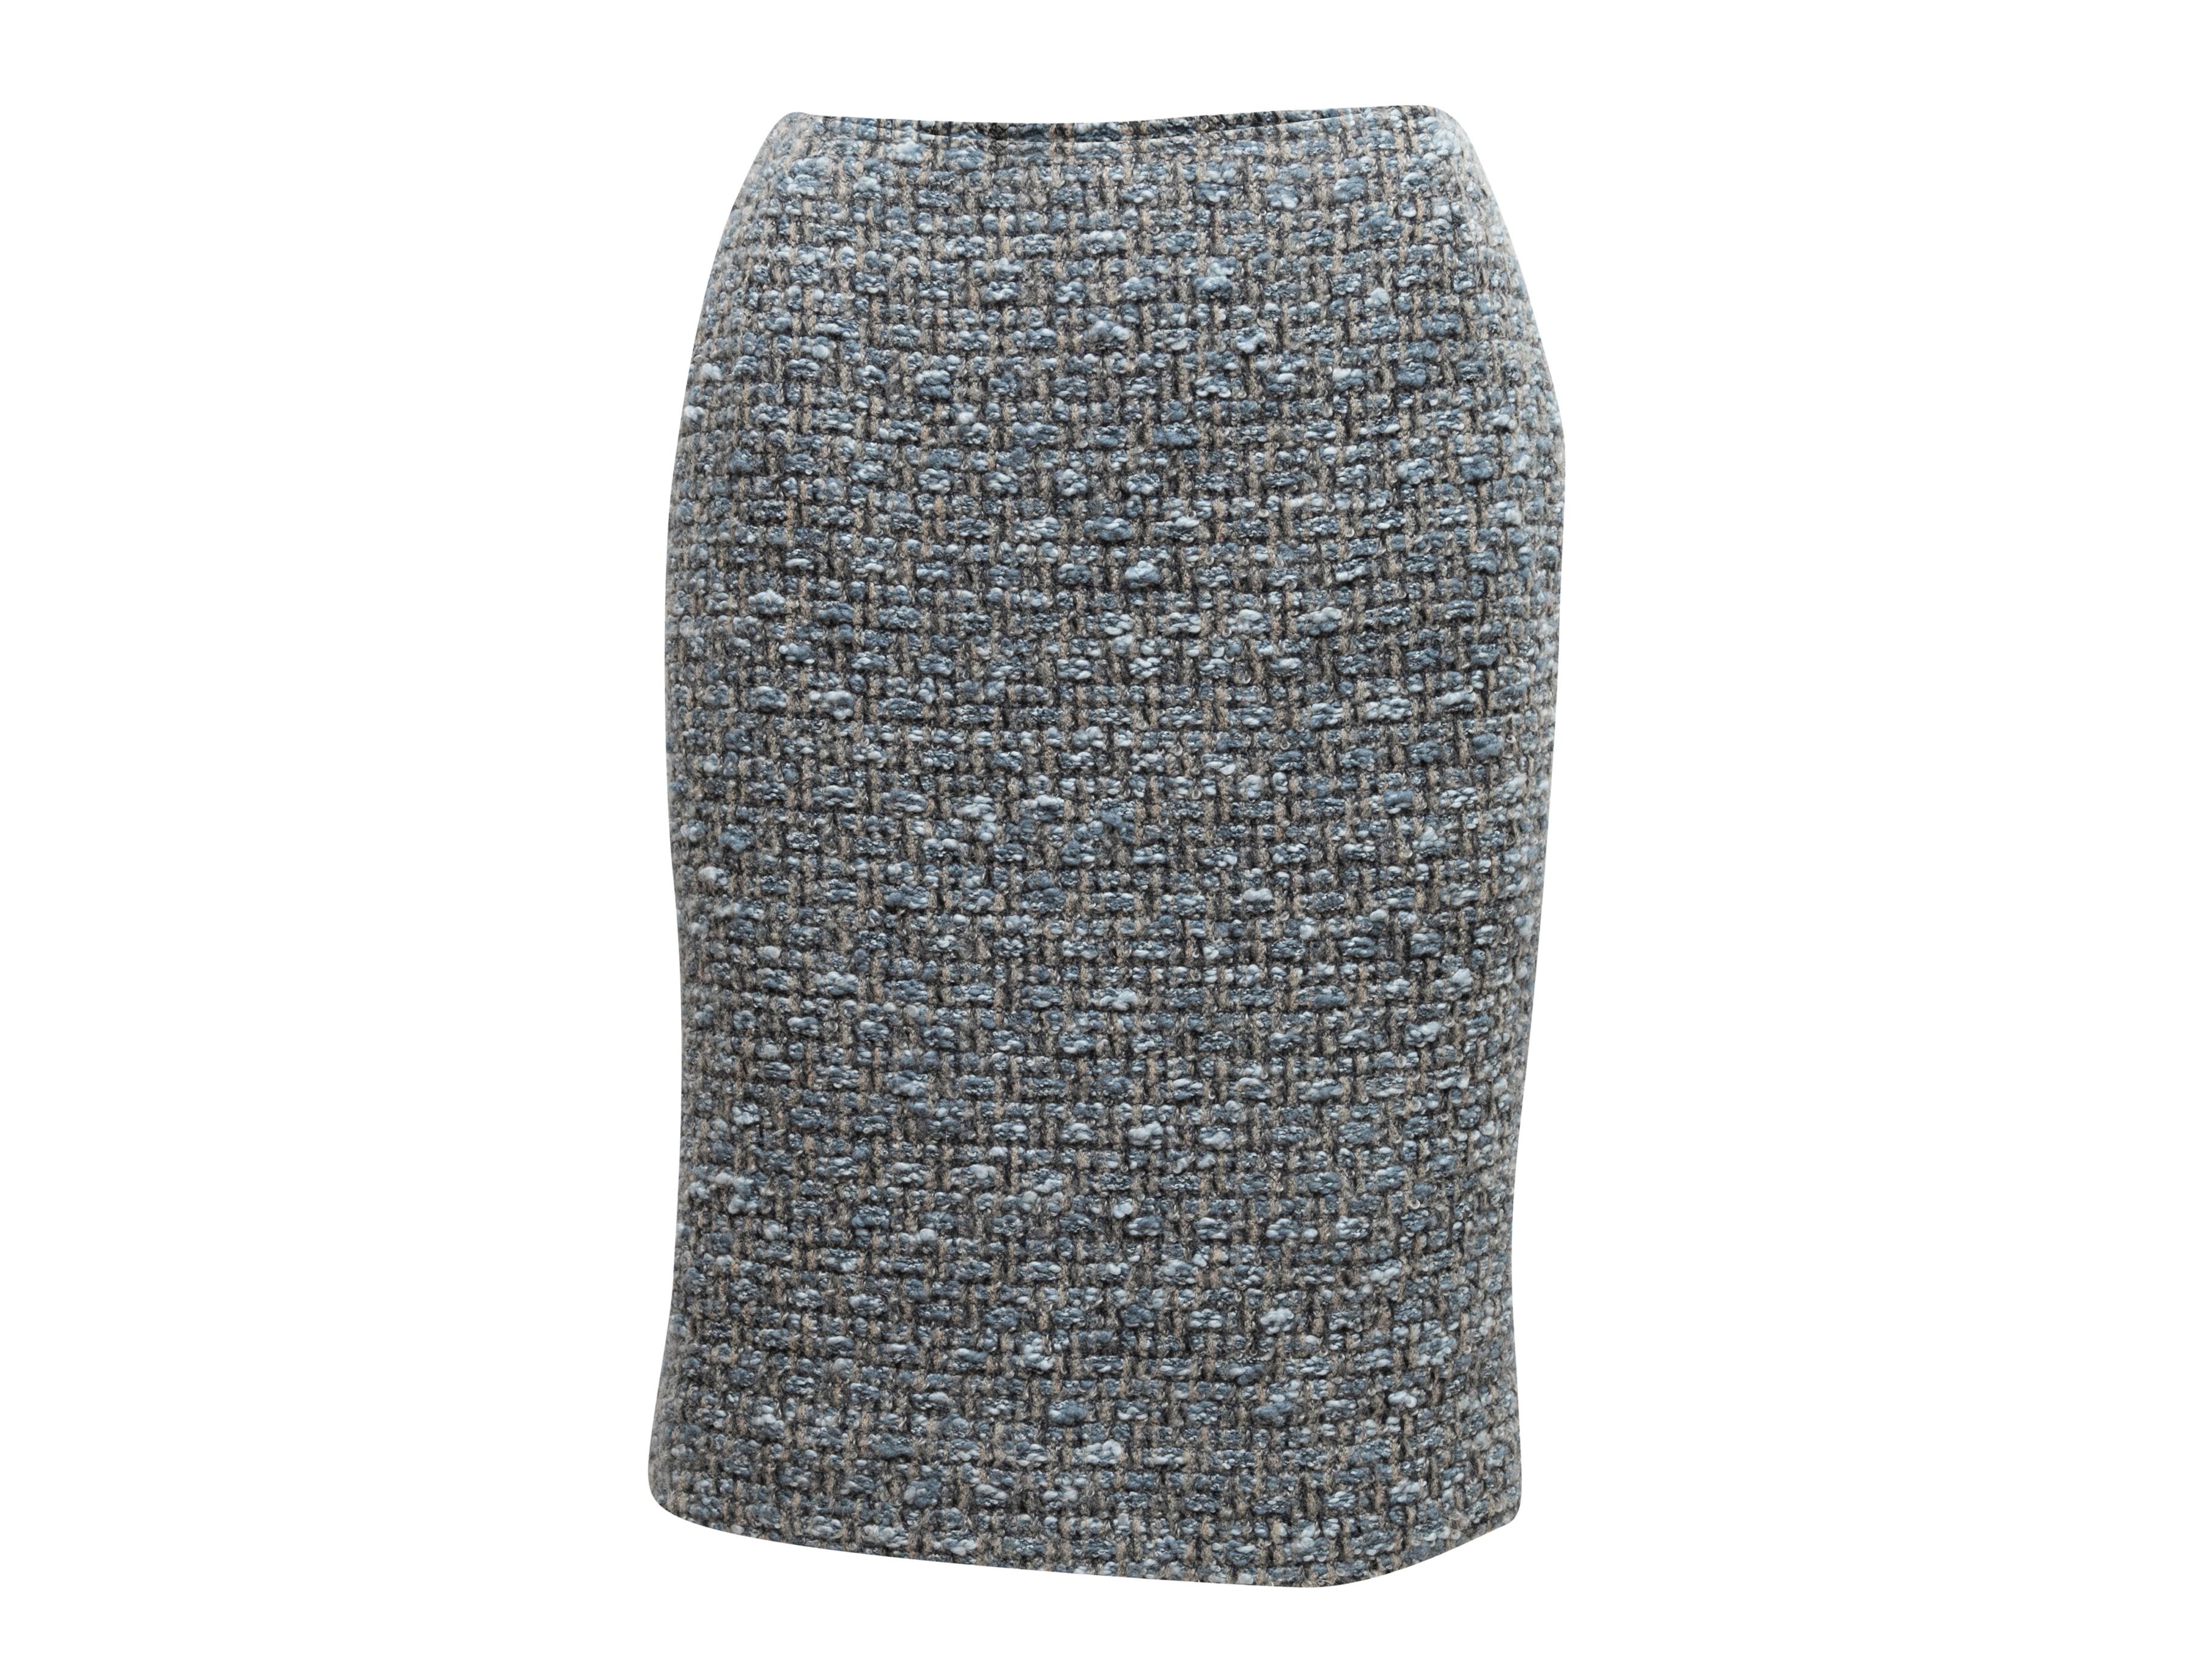 Light blue and grey wool and cashmere tweed skirt suit by Oscar de la Renta. Jacket features fringe trim and front zip closure. Skirt features zip closure. Jacket- 36